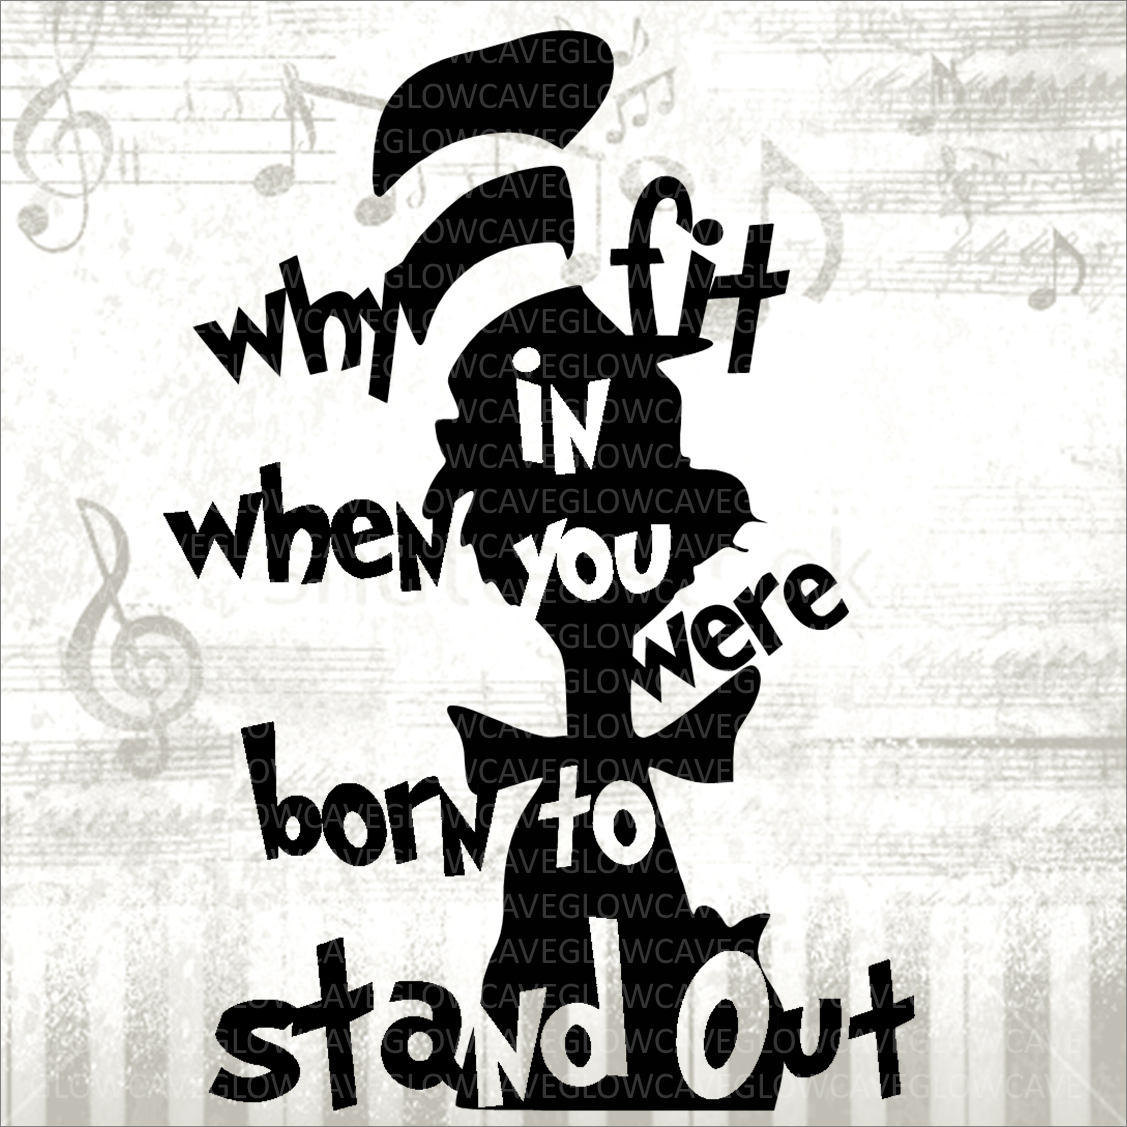 Download Dr Seuss svg/ Dr Suess image/ Cat in the Hat SVG/ Cat in hat